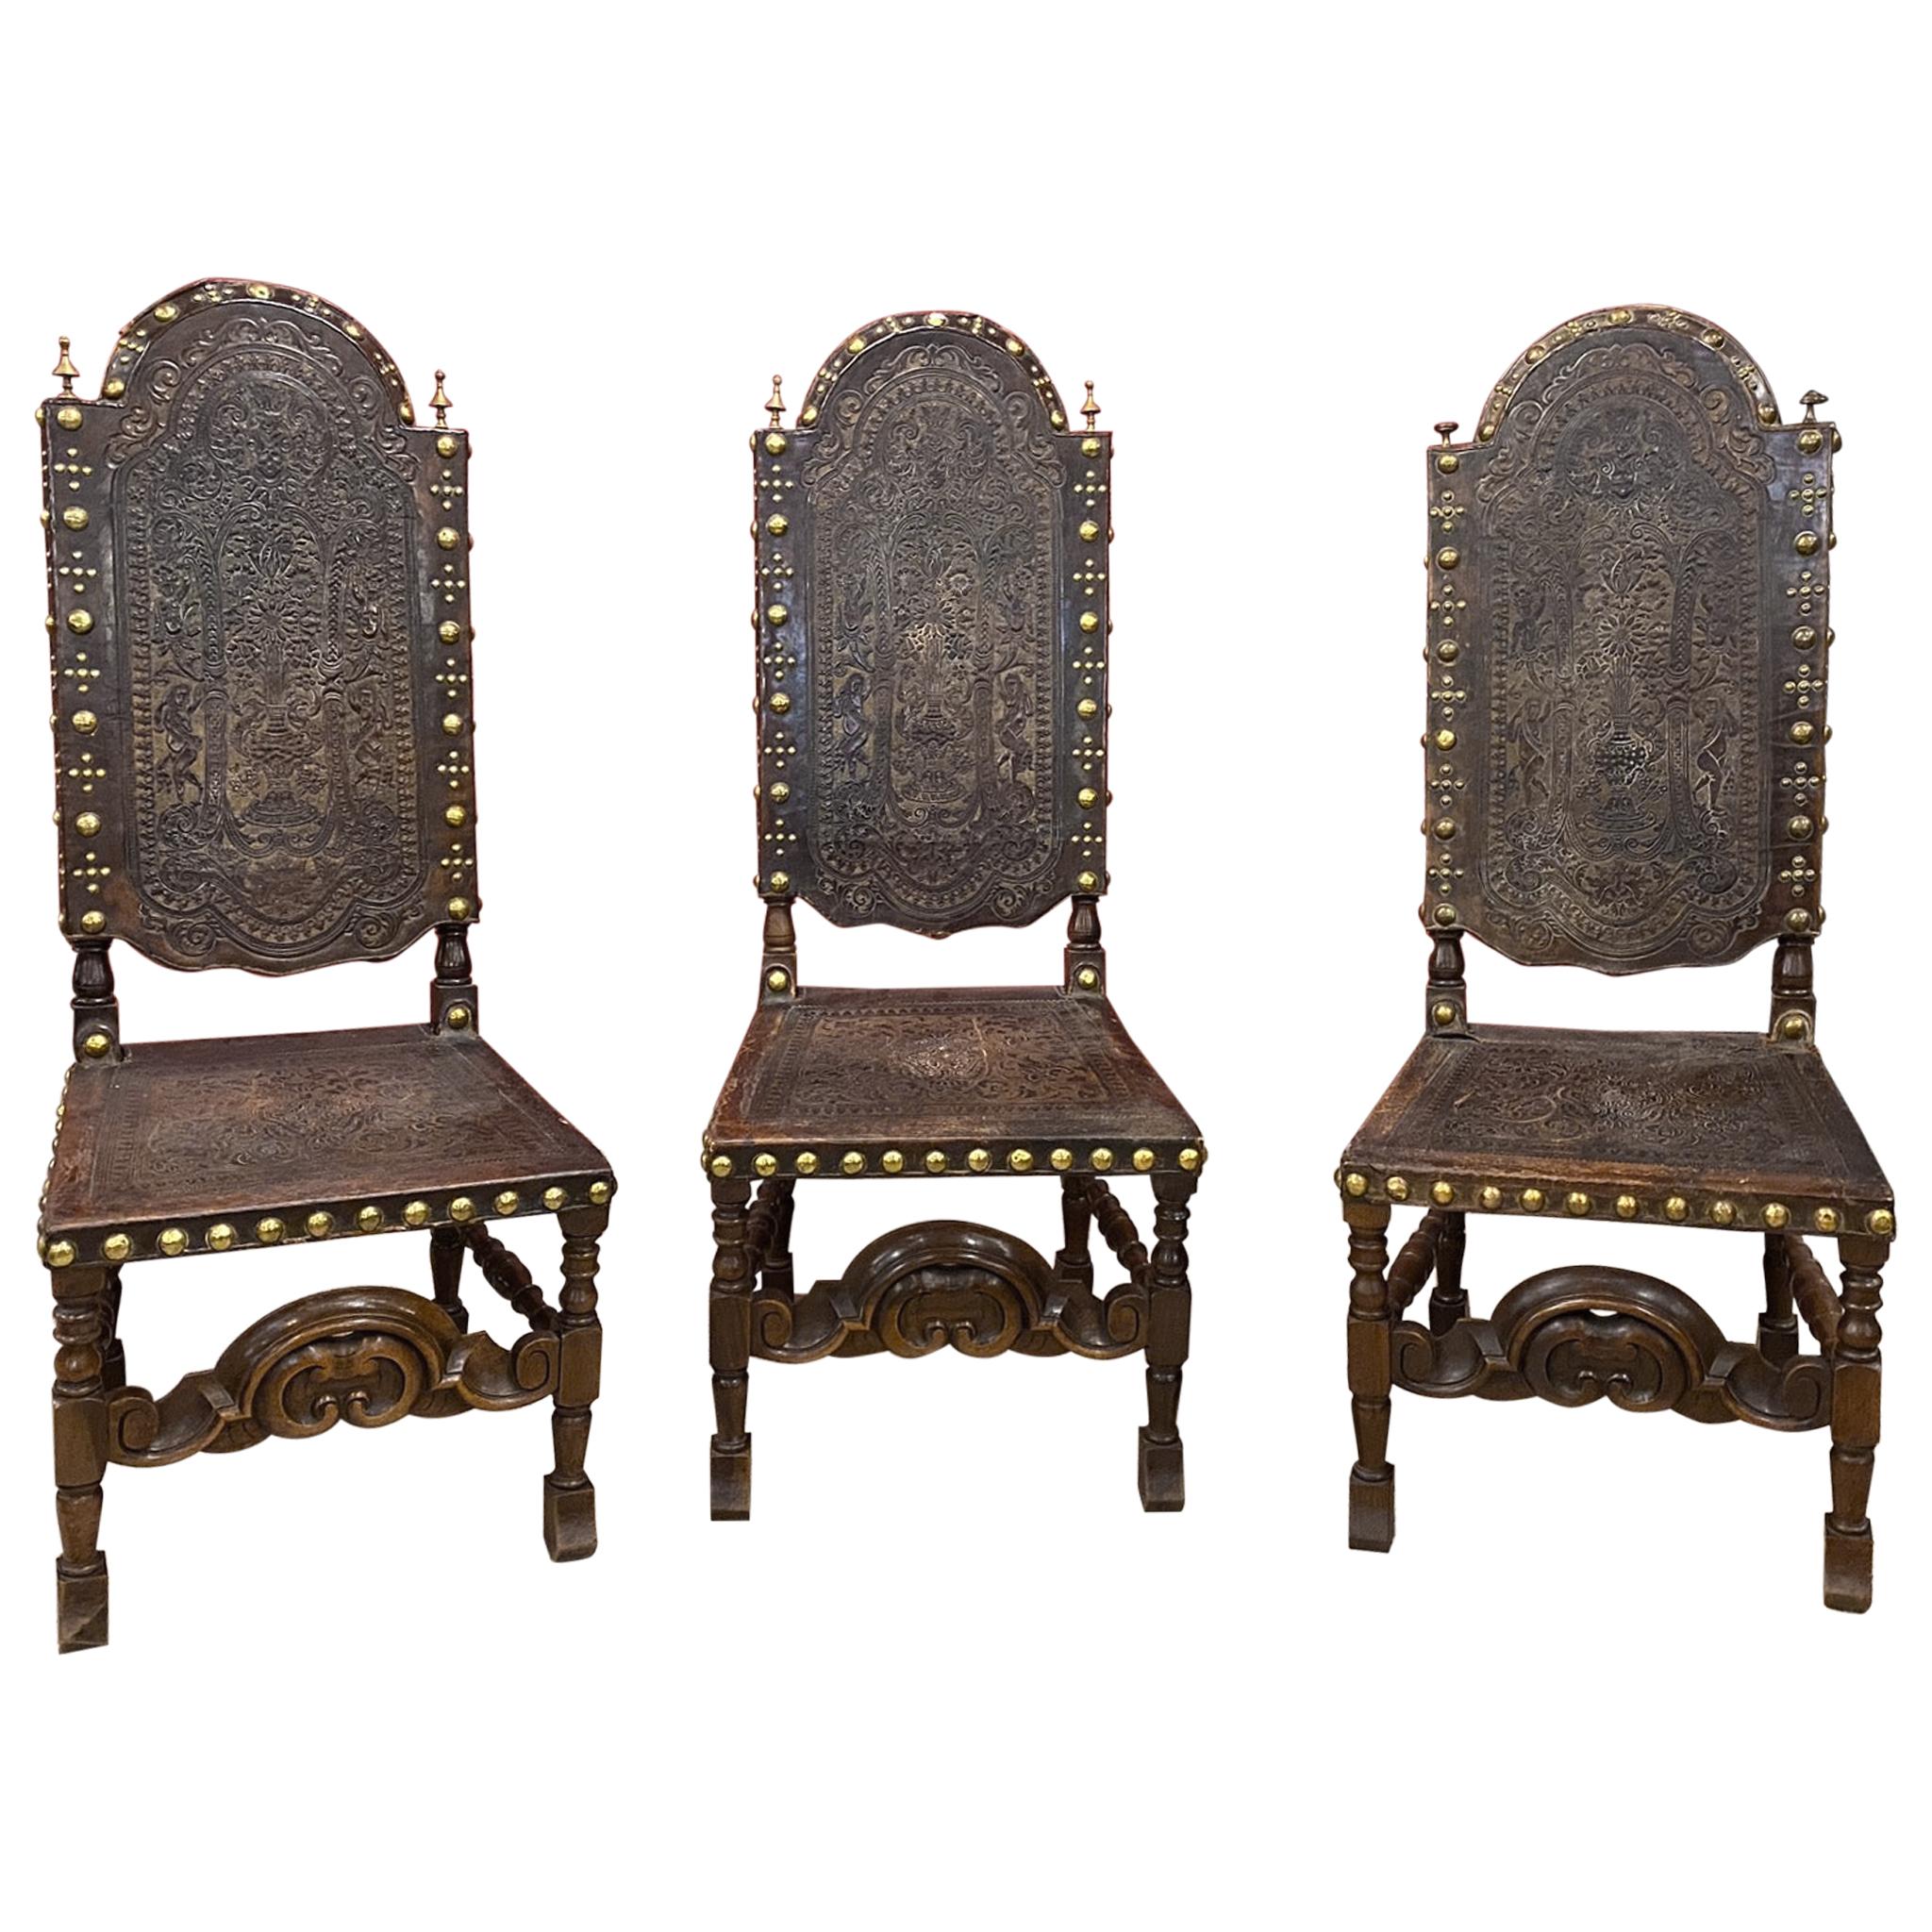 3 High-Backed Chairs, Cordoba Leather Trim with Native American Decor, Spain